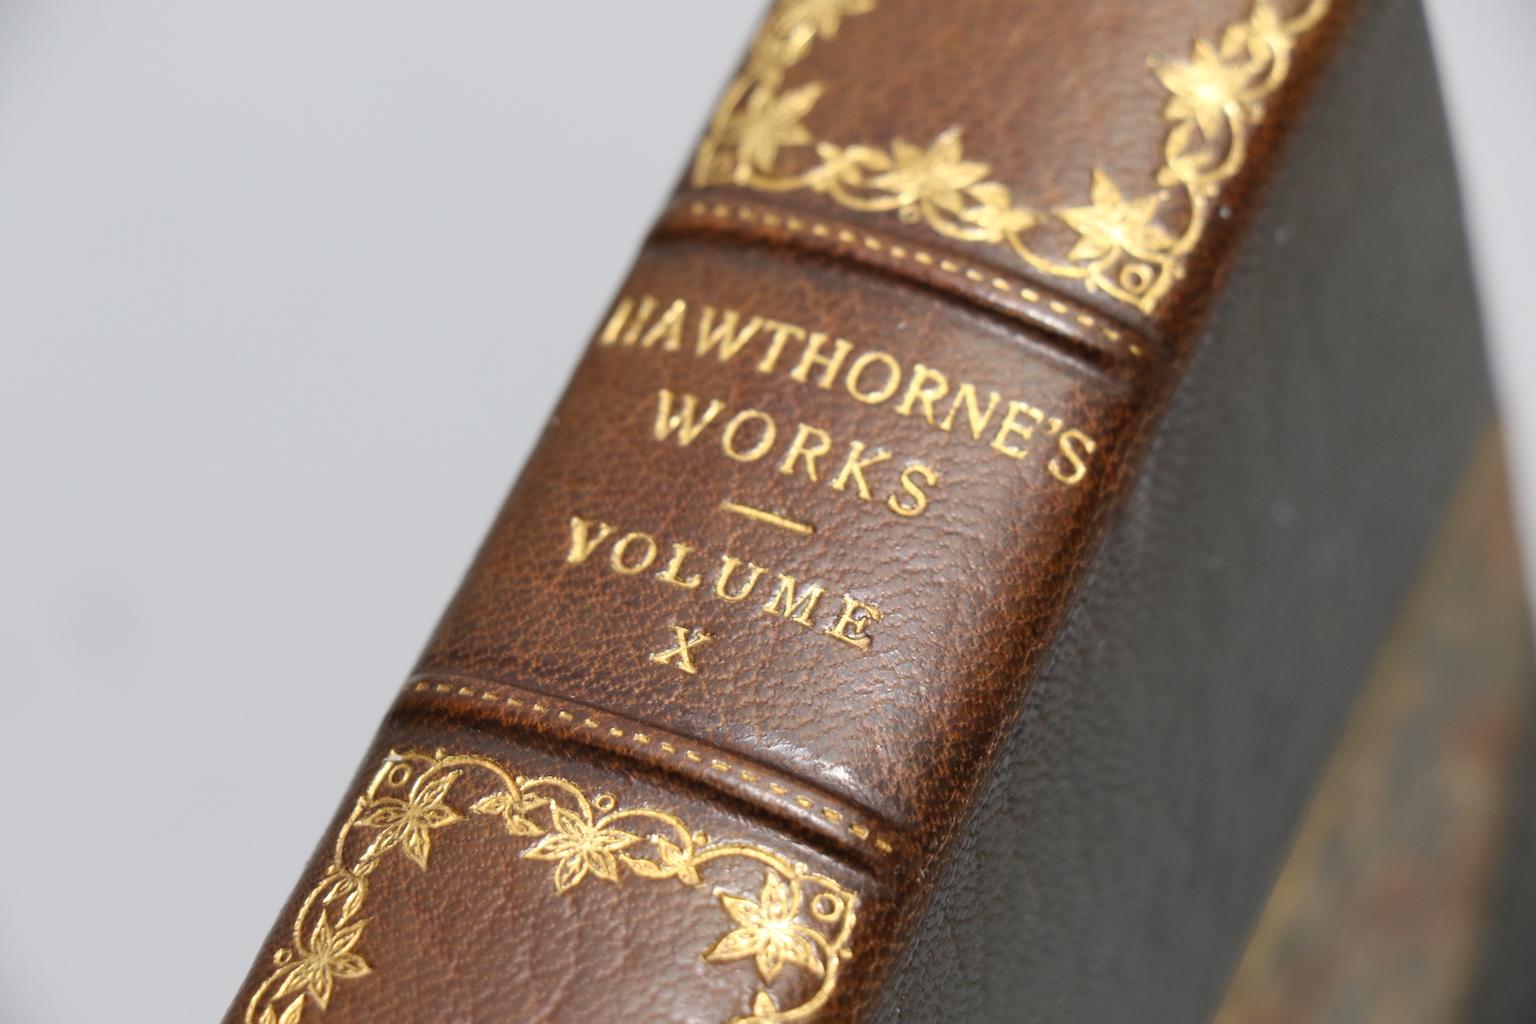 Books, The Writings of Nathaniel Hawthorne. Edited with Preface and Notes by Julian Hawthorne.

24 volumes. Octavos. Large Paper Edition. Limited to five hundred copies, this is #273. Bound in three-quarter grey morocco leather with marbled